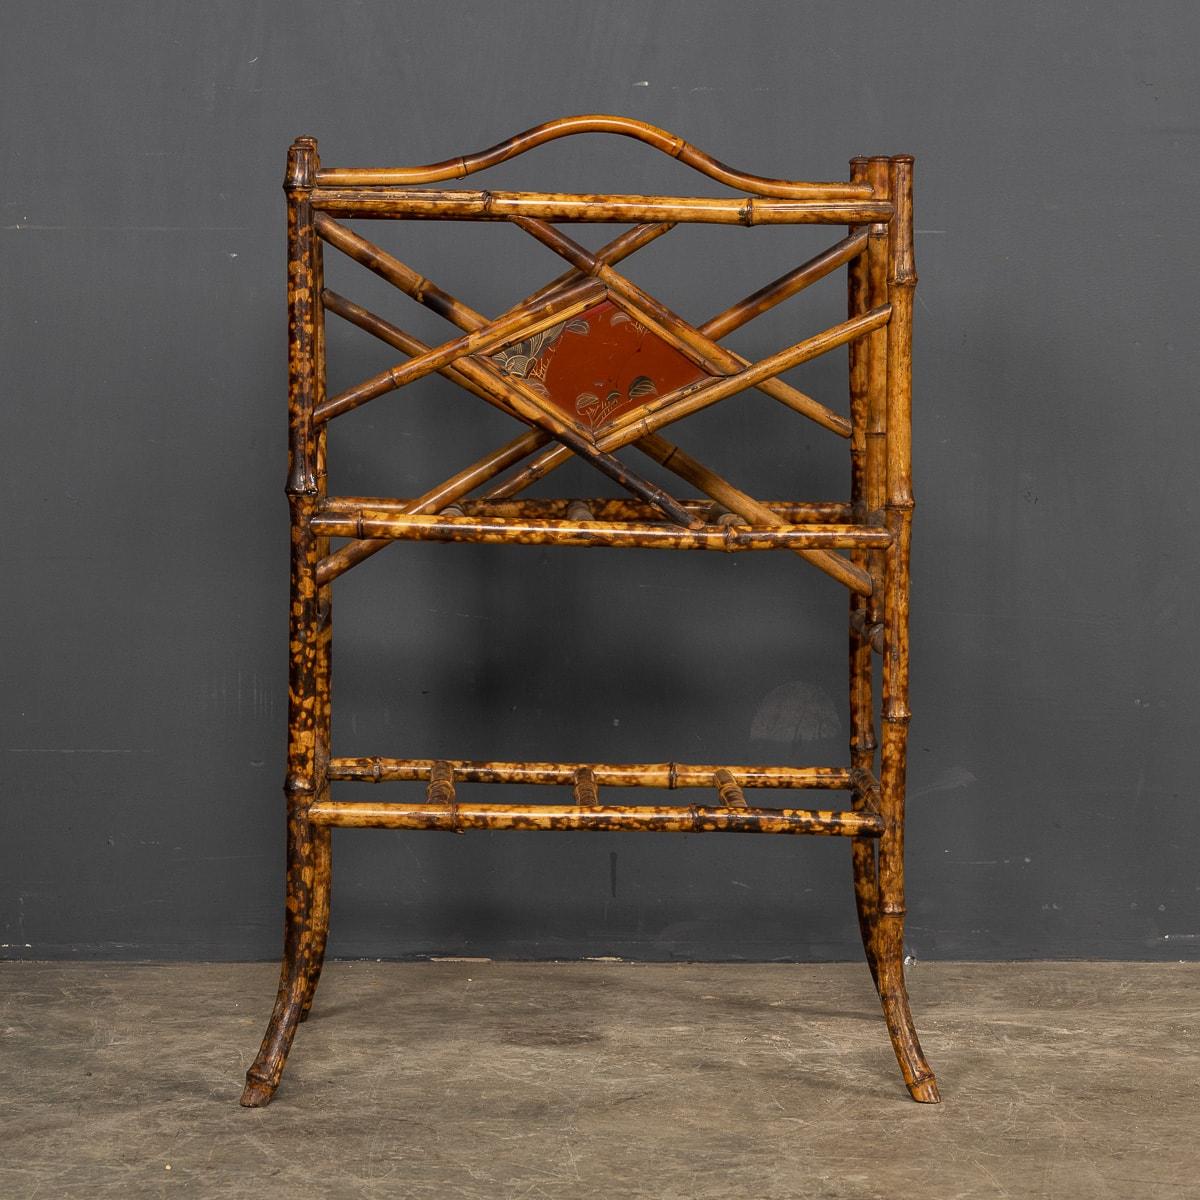 20th Century Bamboo Magazine Rack with a Japanesque Lacquer Finish, circa 1920 For Sale 2